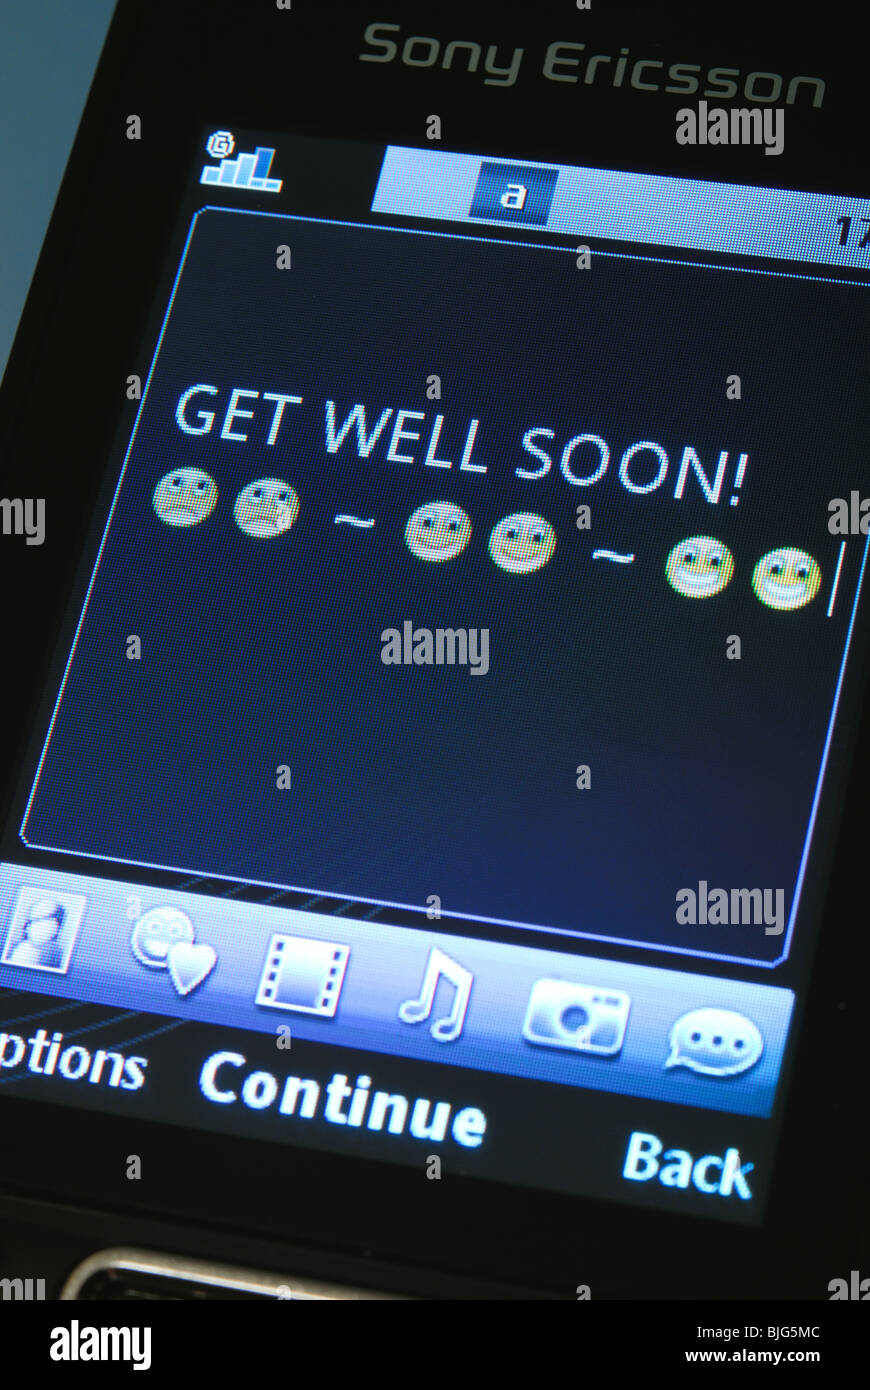 A 'Get well soon' text message on a mobile phone. Stock Photo